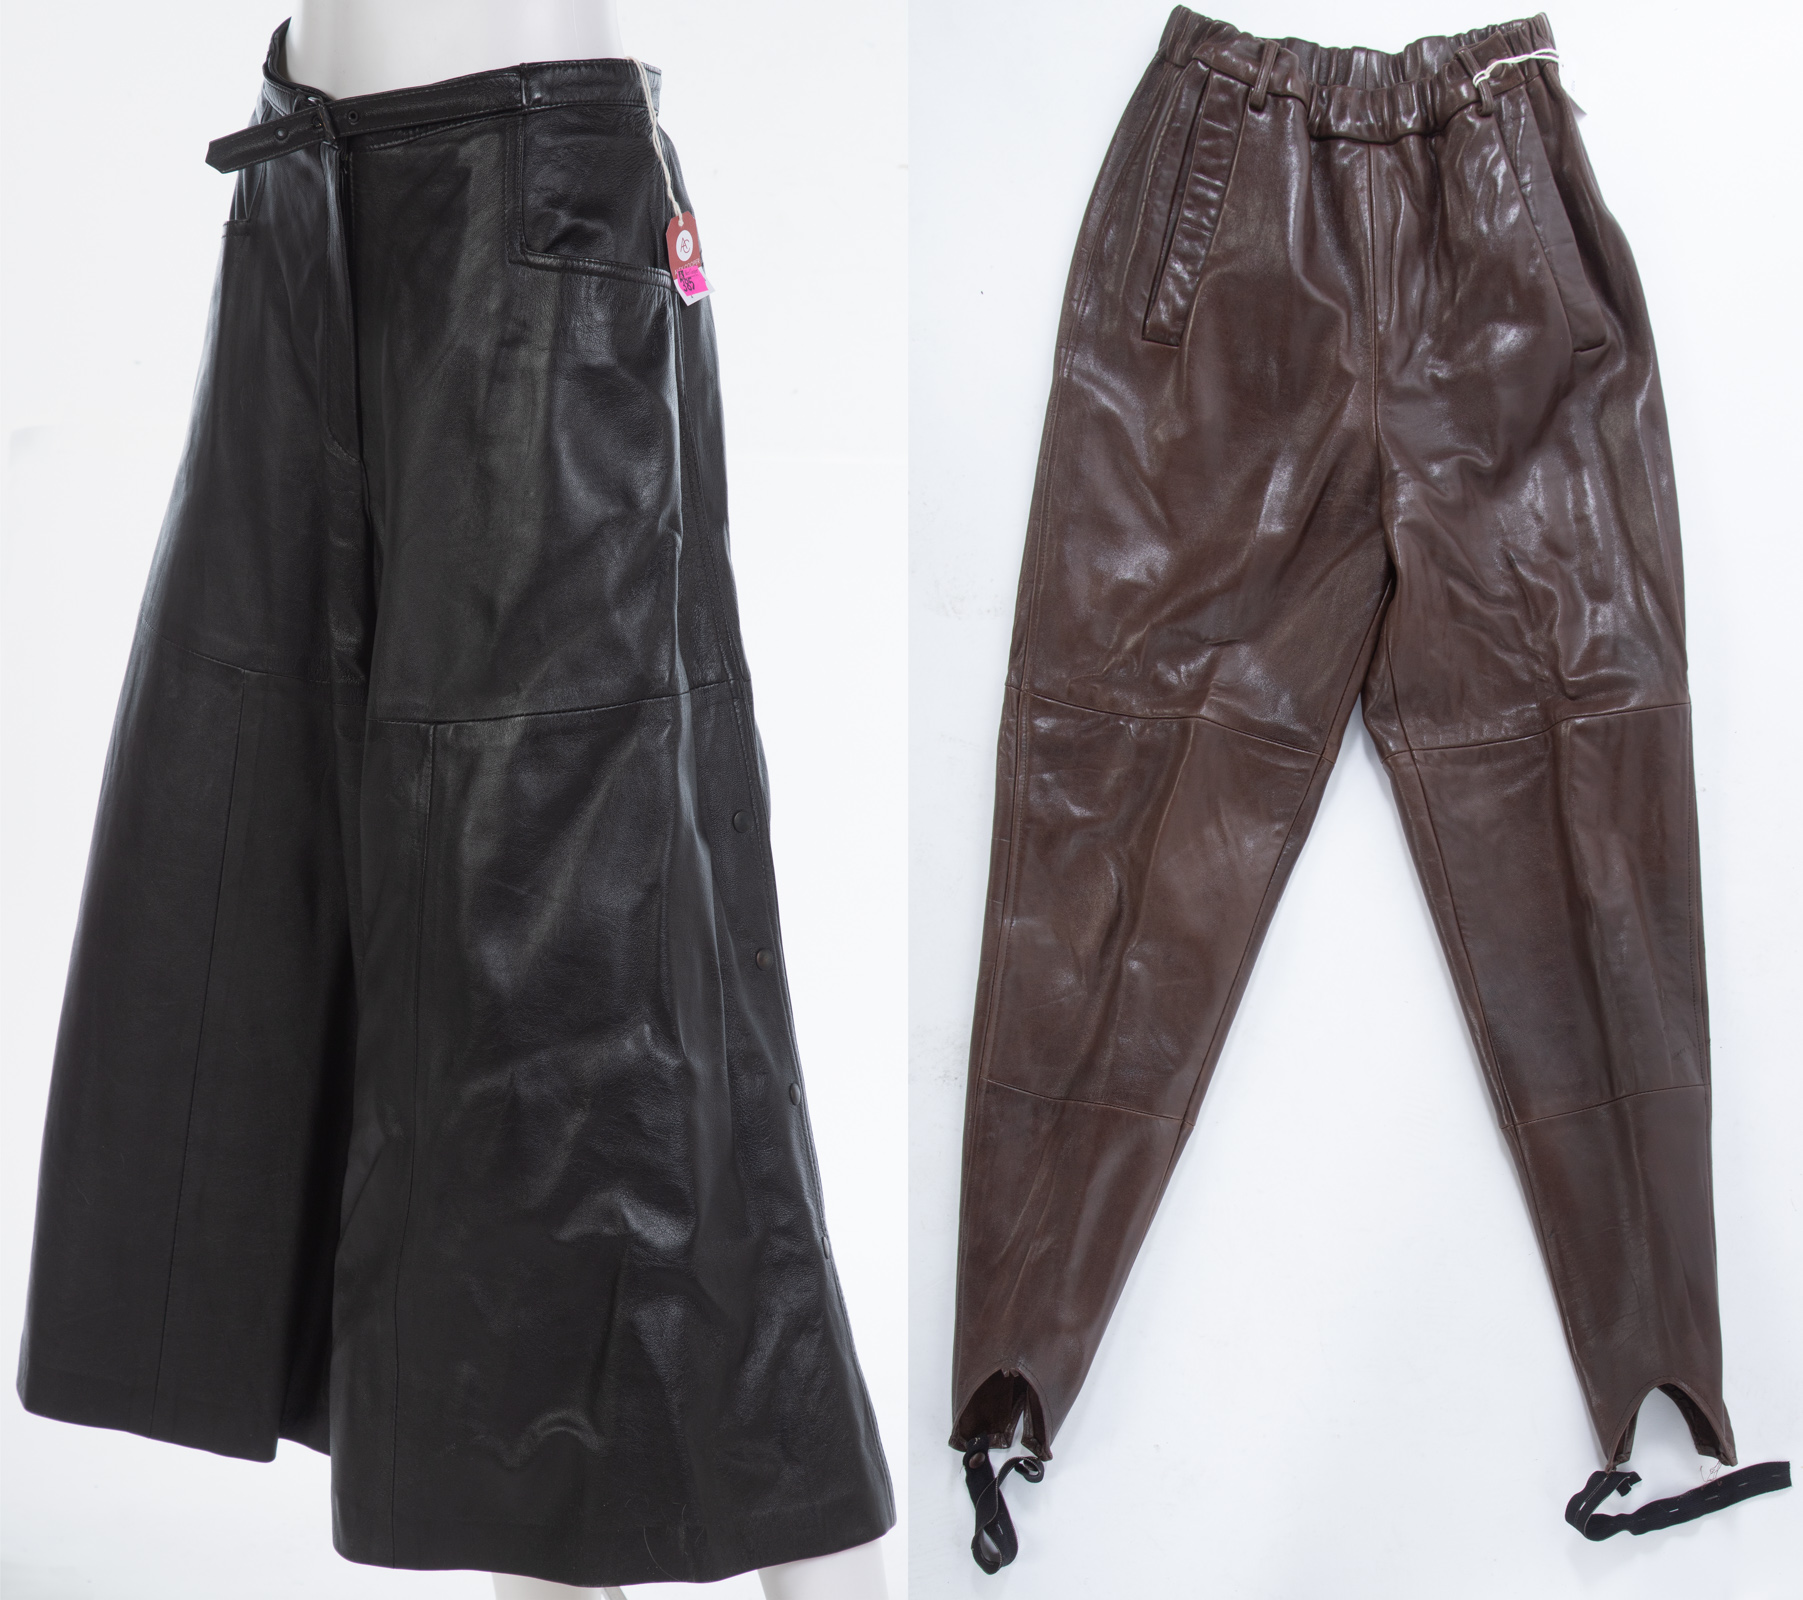 TWO PAIRS OF LEATHER PANTS Includes 337306